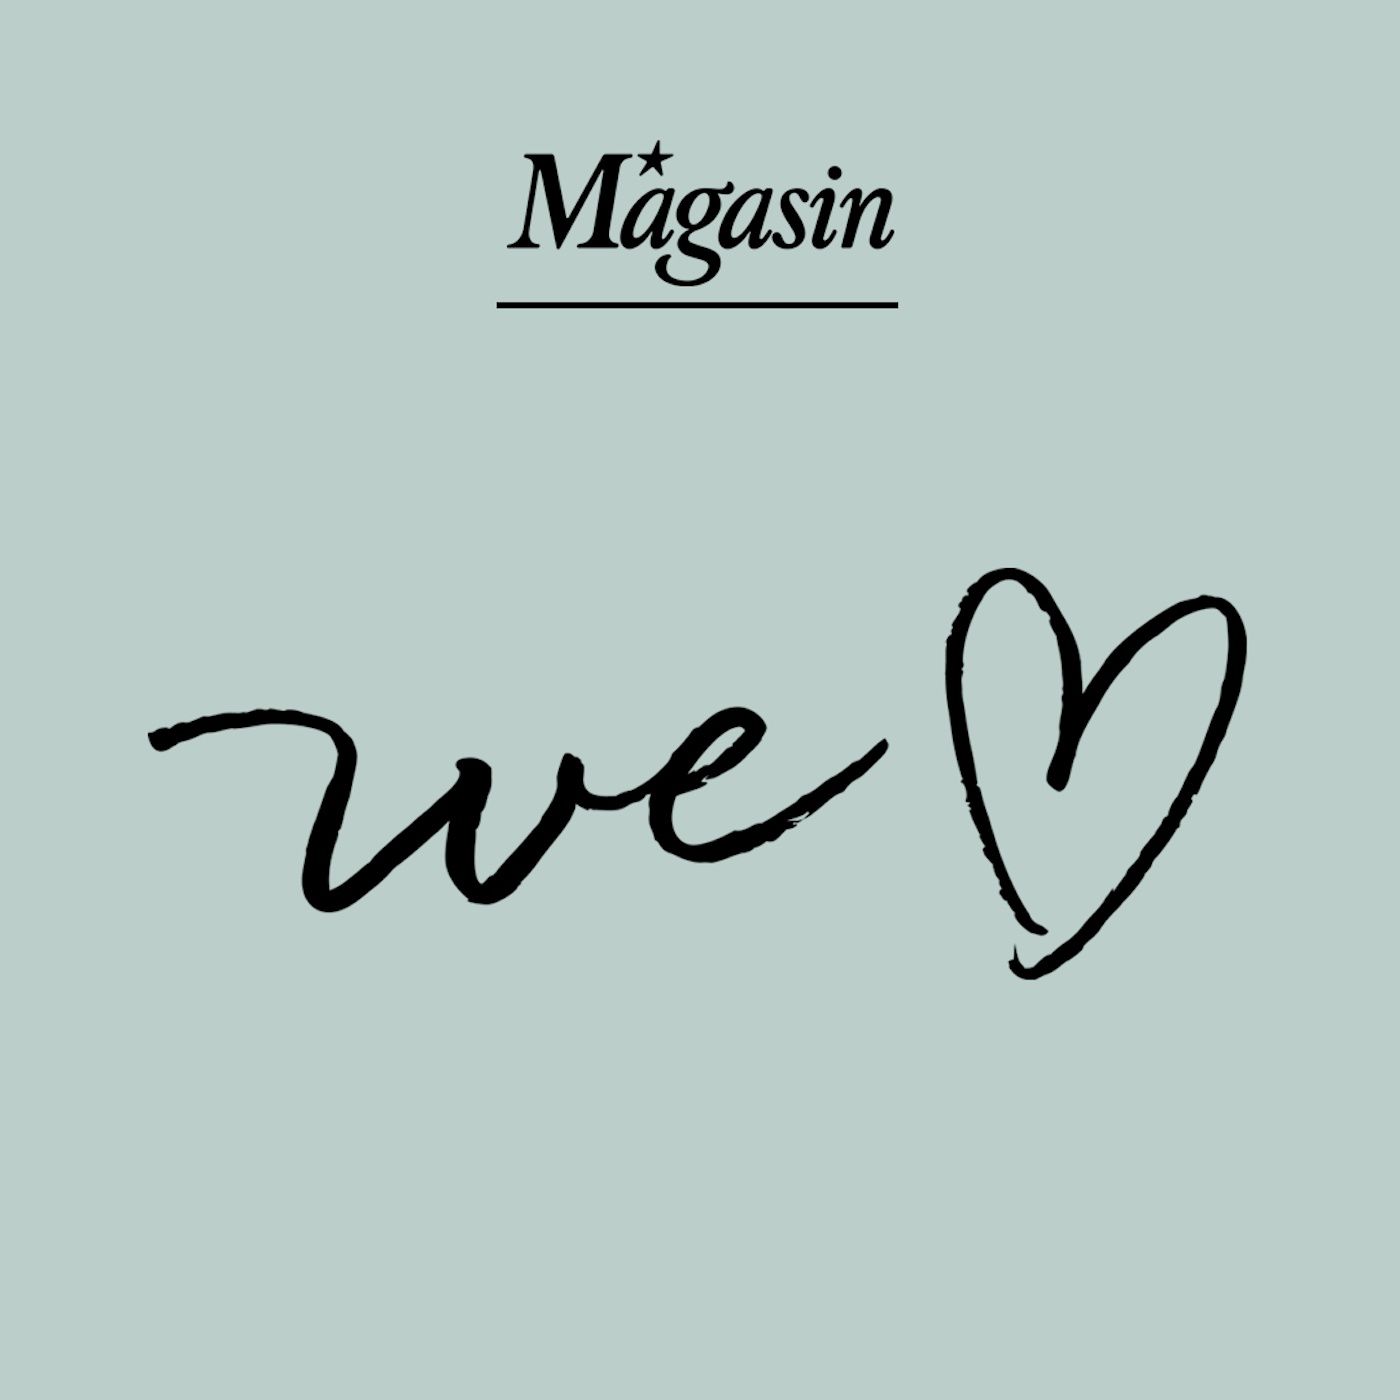 Magasin - We Love